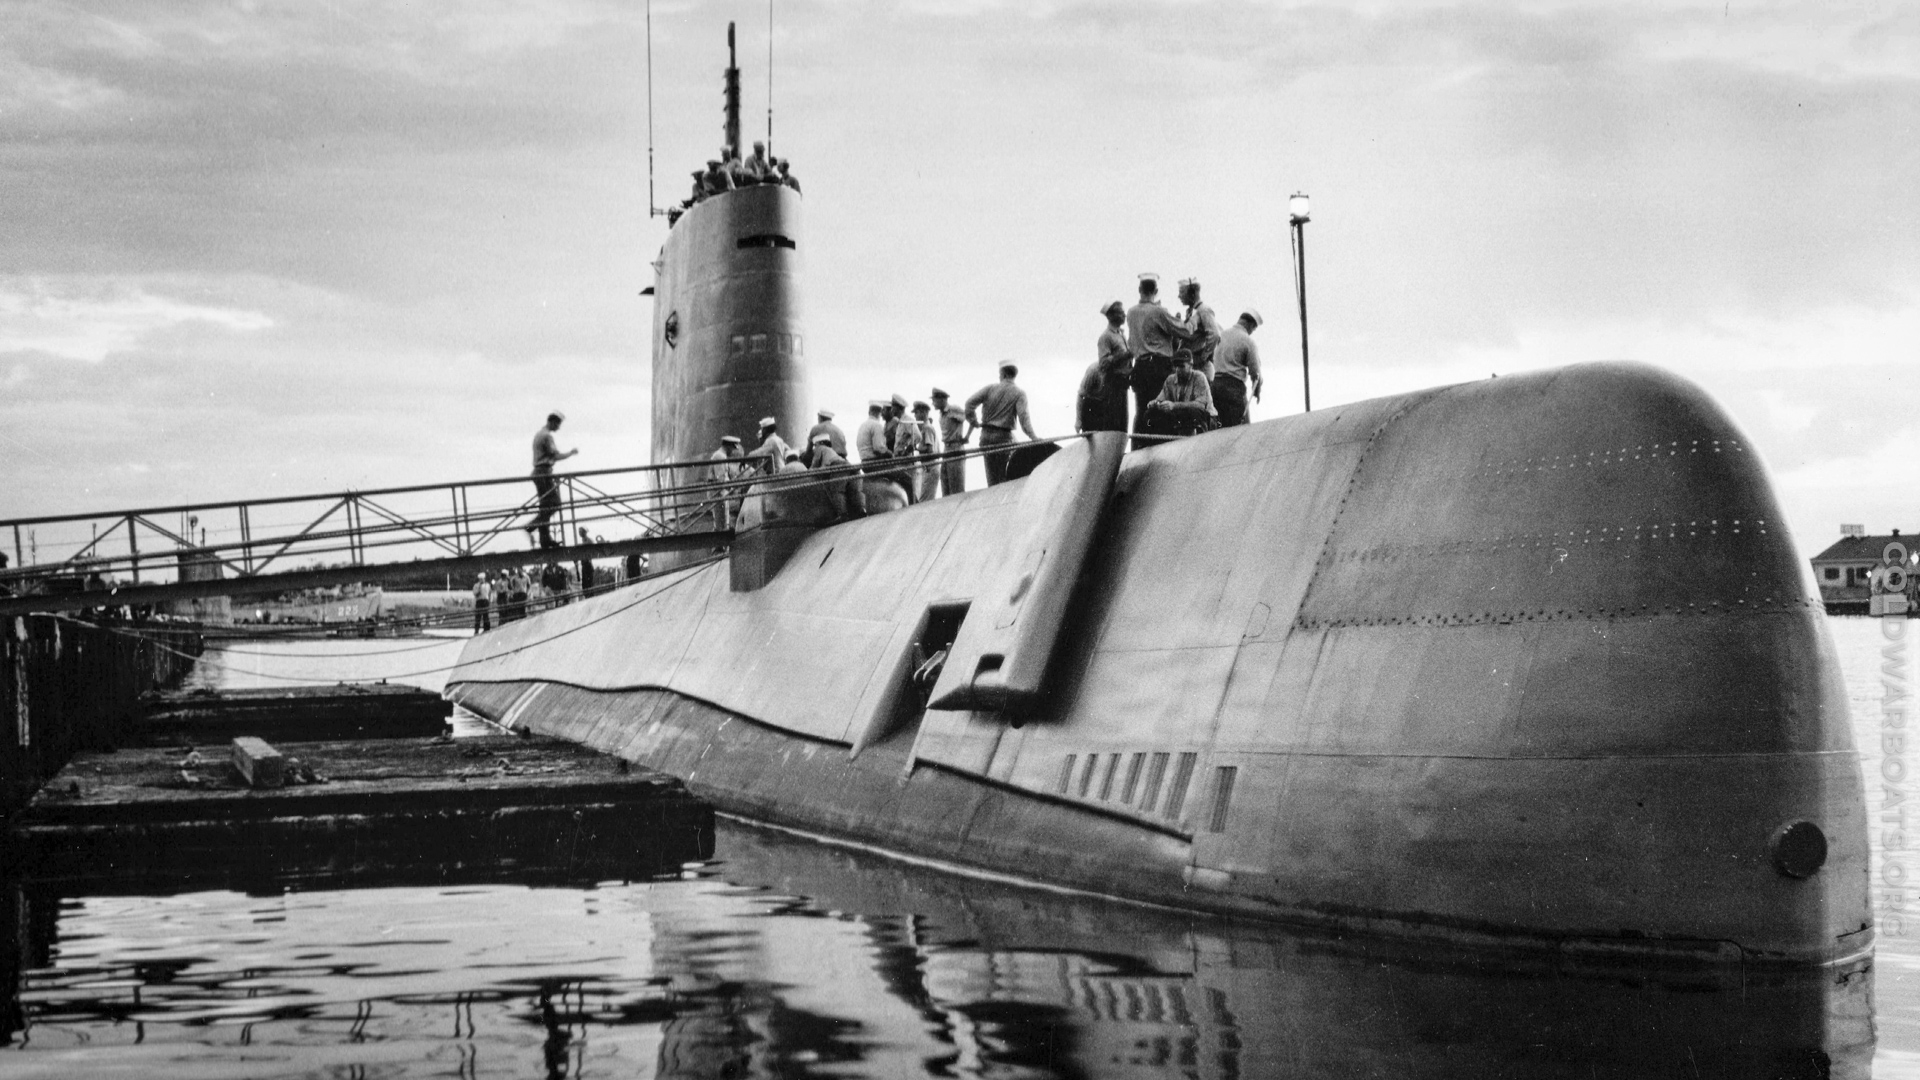 The crew of the USS NAUTILUS (SSN 571) makes ready for her second attempt on the North Pole in Pearl Harbor, HI.